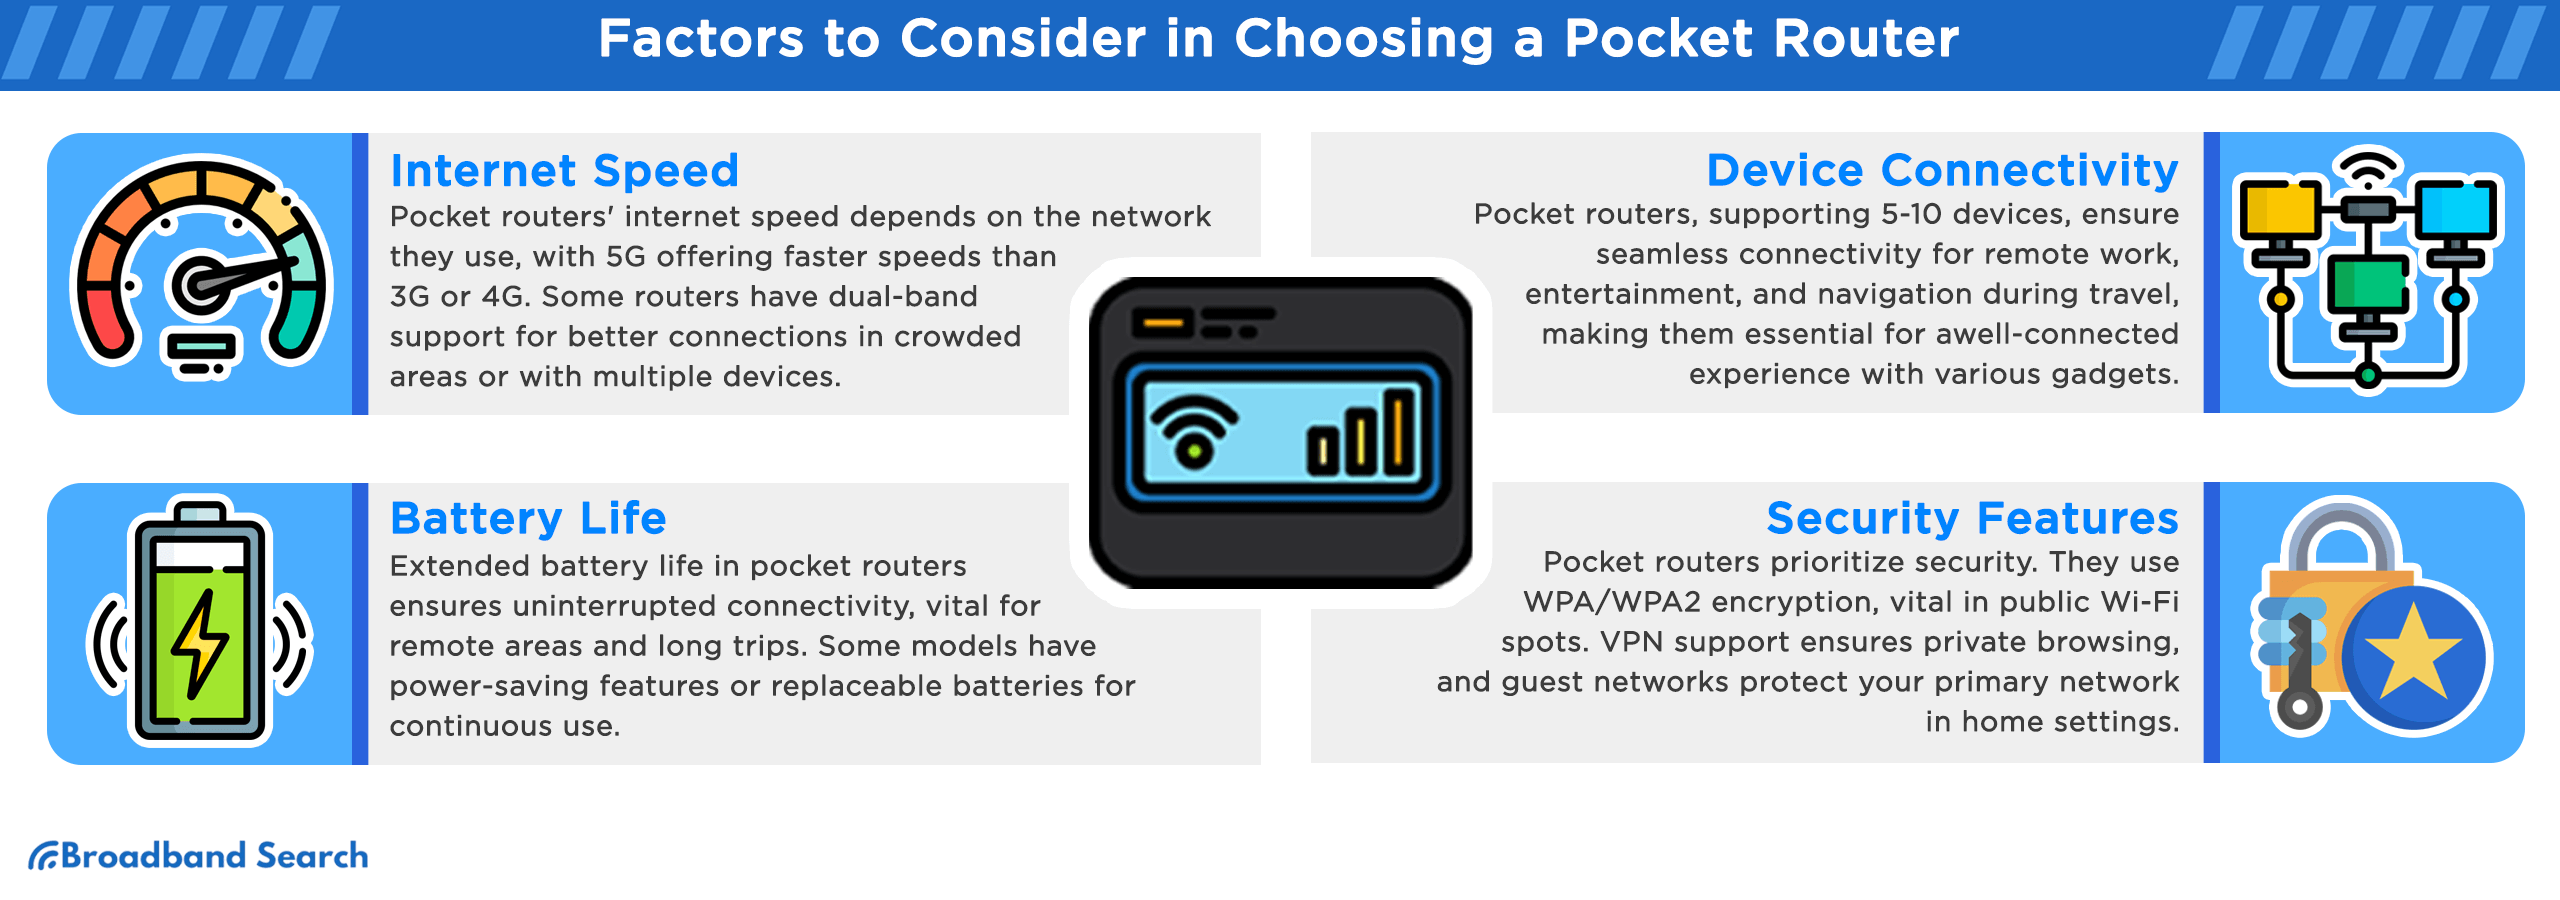 four Factors to consider in choosing a pocket router